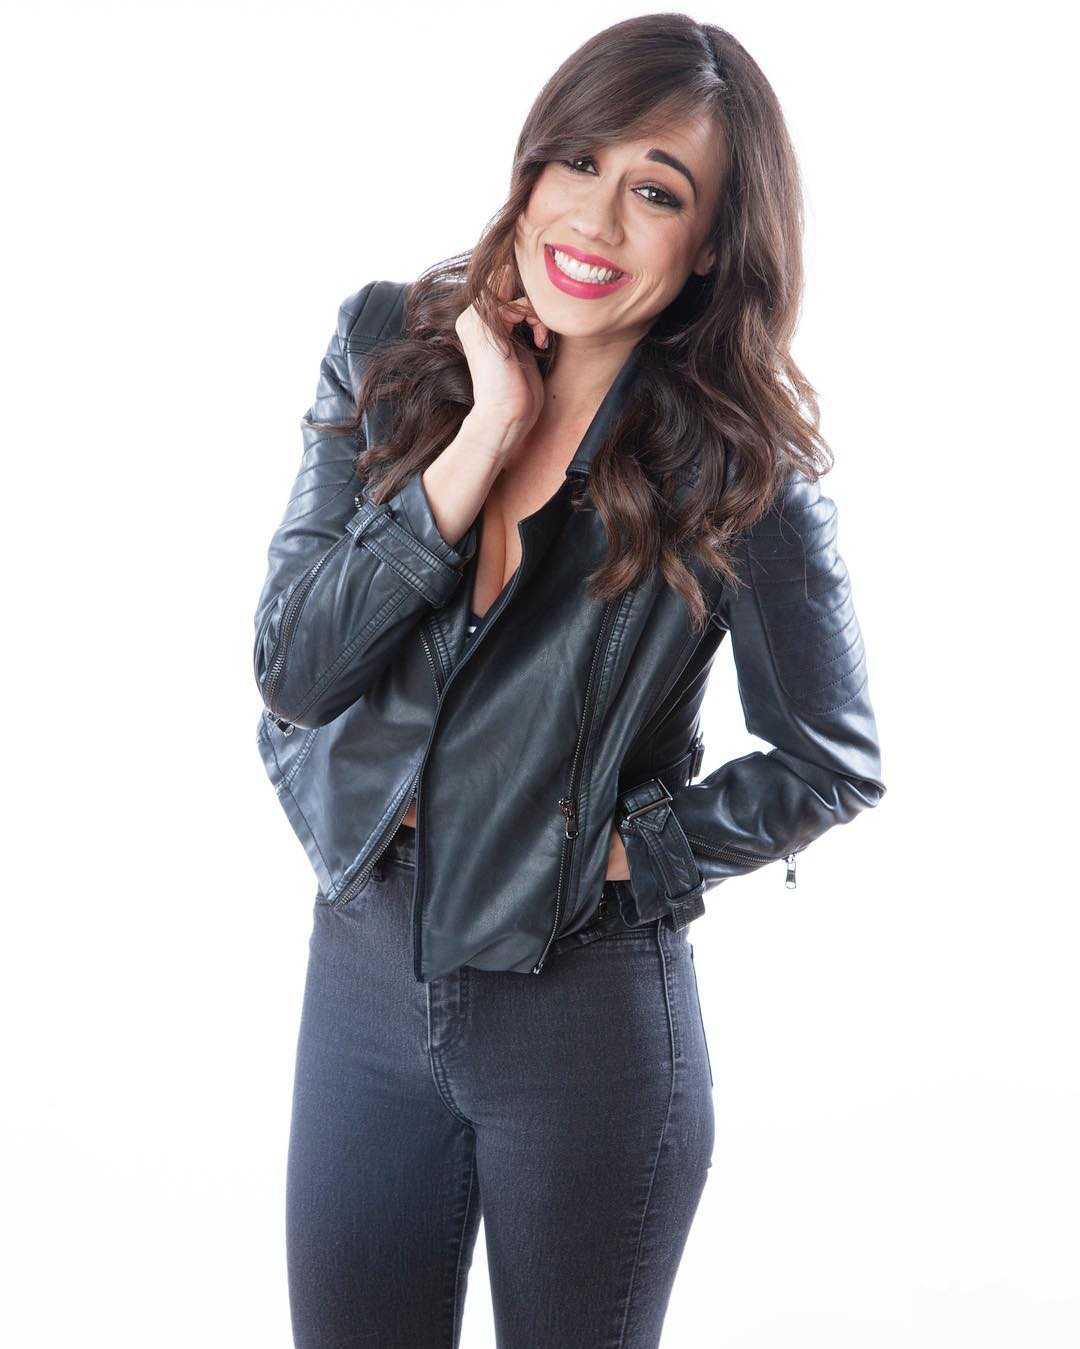 51 Hottest Colleen Ballinger Big Butt Pictures That Will Make You Begin To Look All Starry Eyed At Her 299